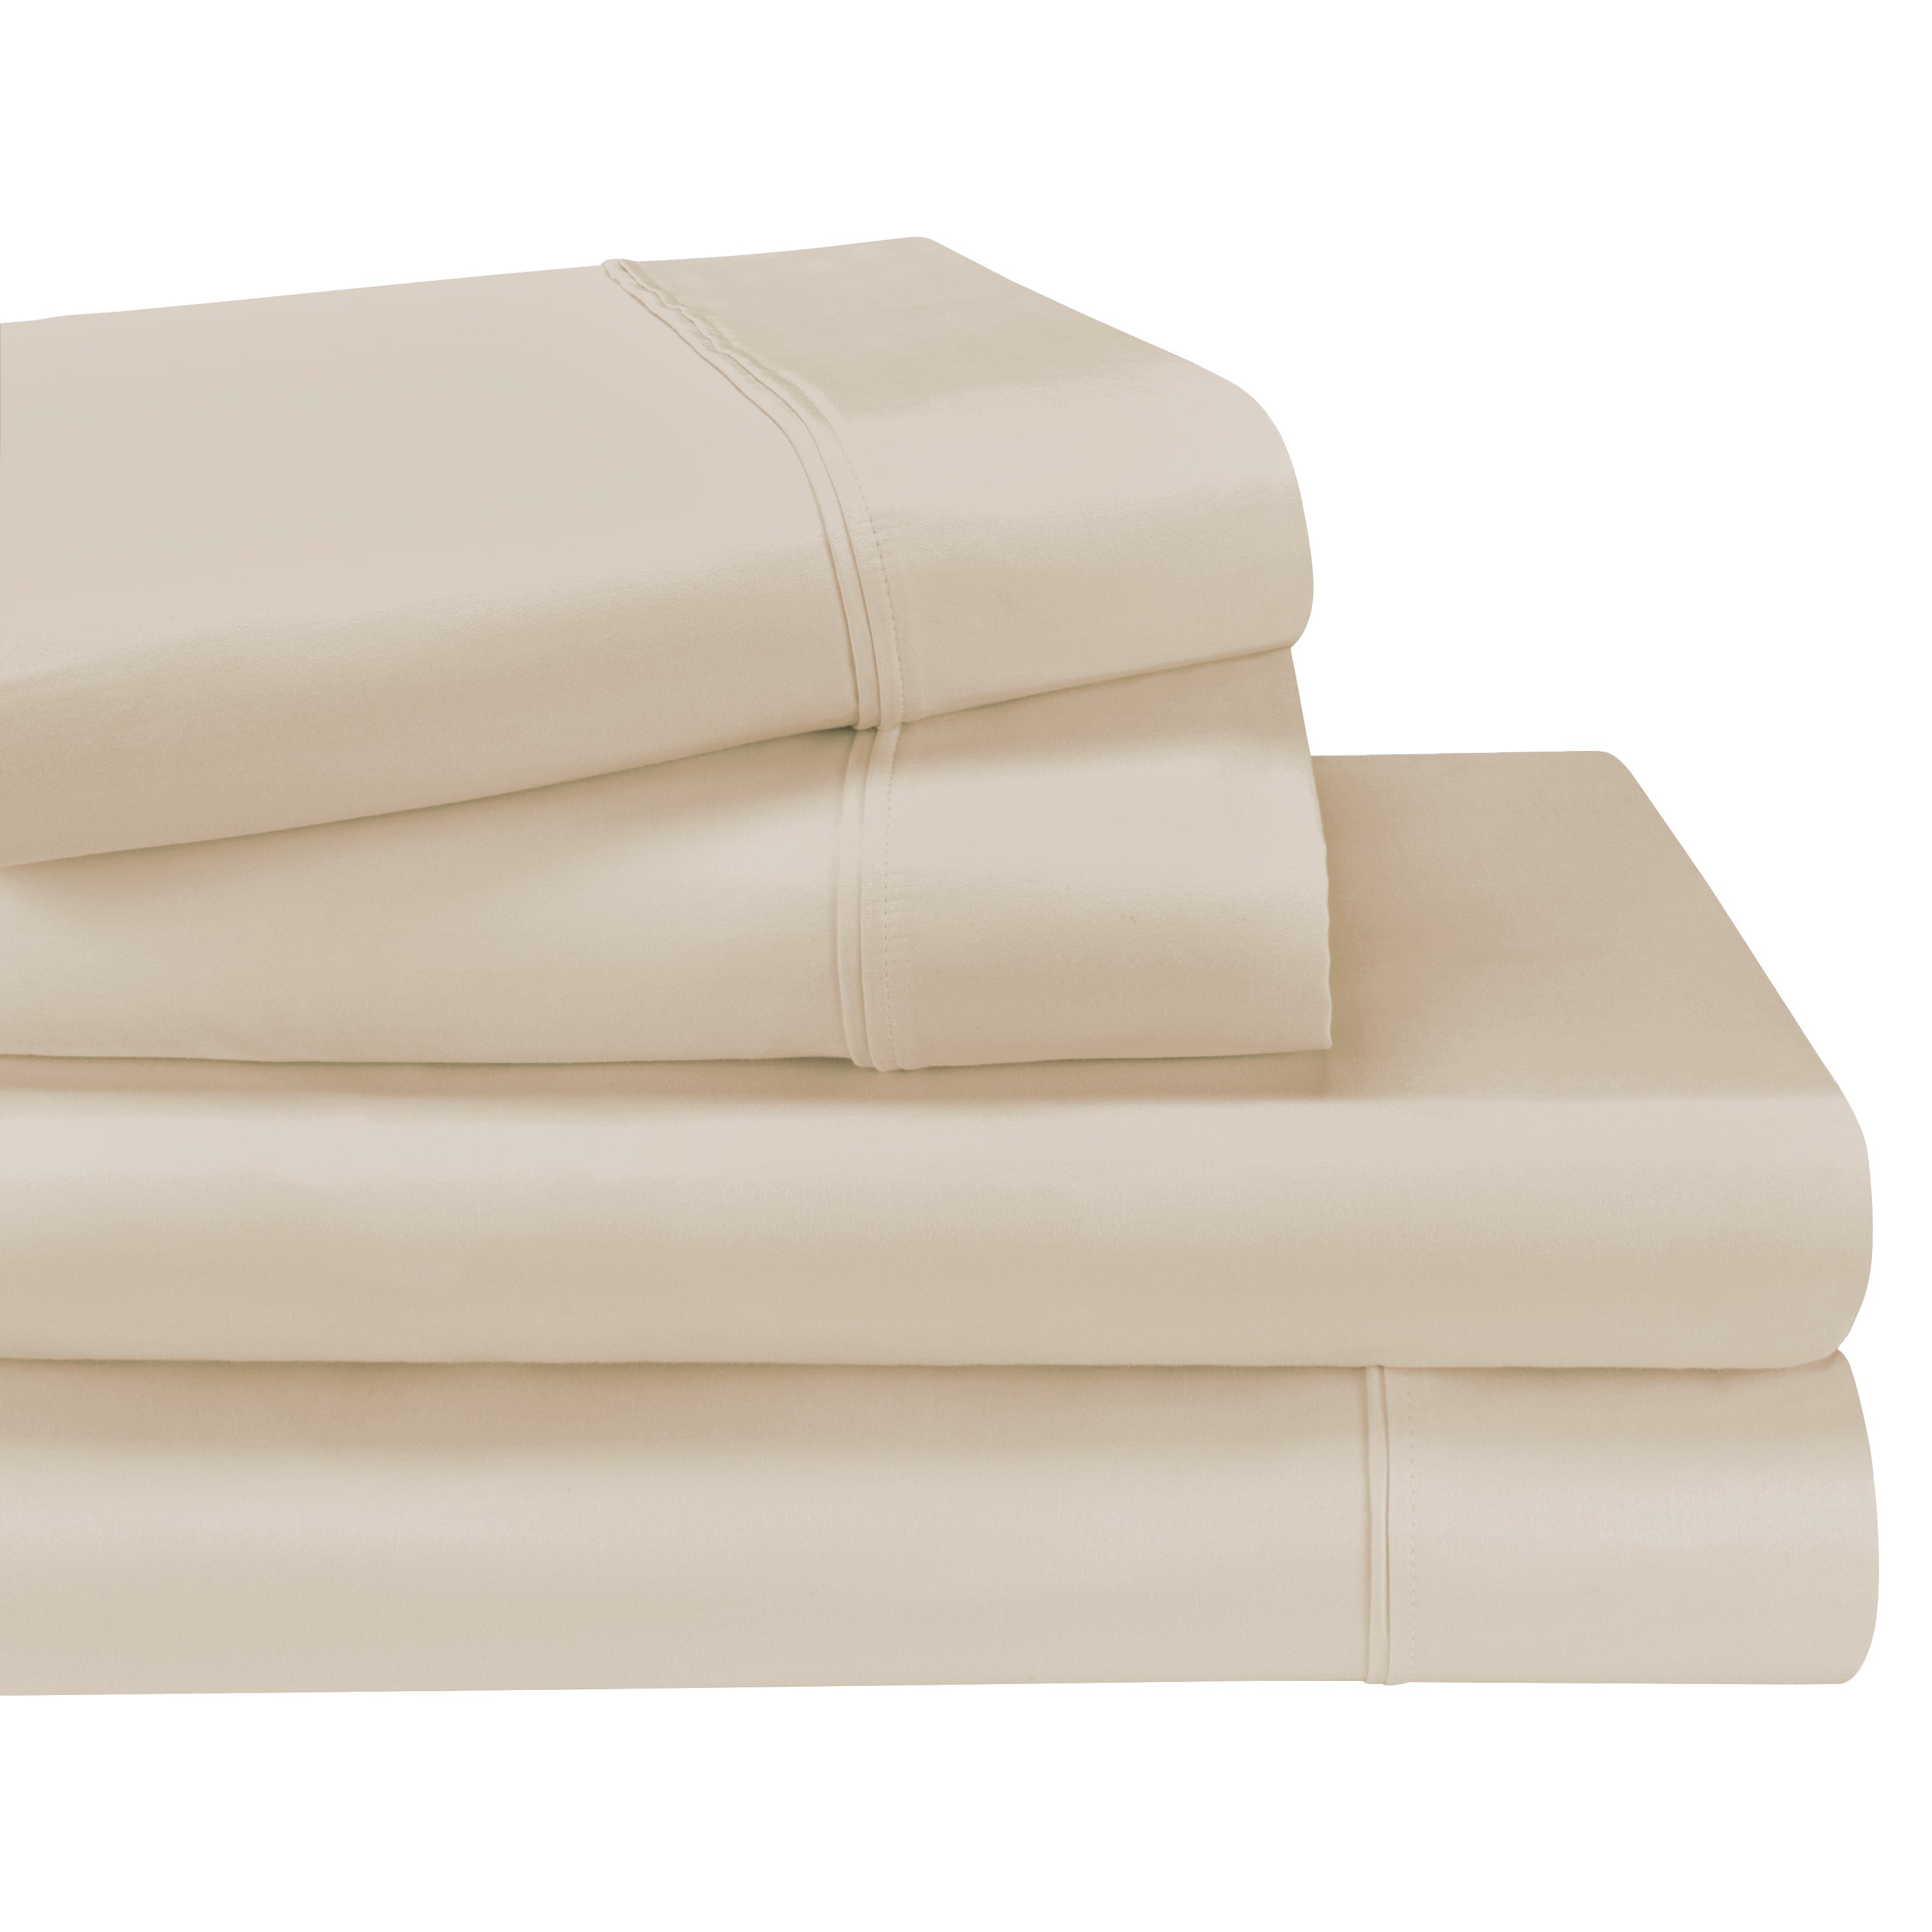 SUPERIOR Superior 1200-Thread Count Breathable Egyptian Cotton Luxurious Solid Deep Pocket Sheet Set